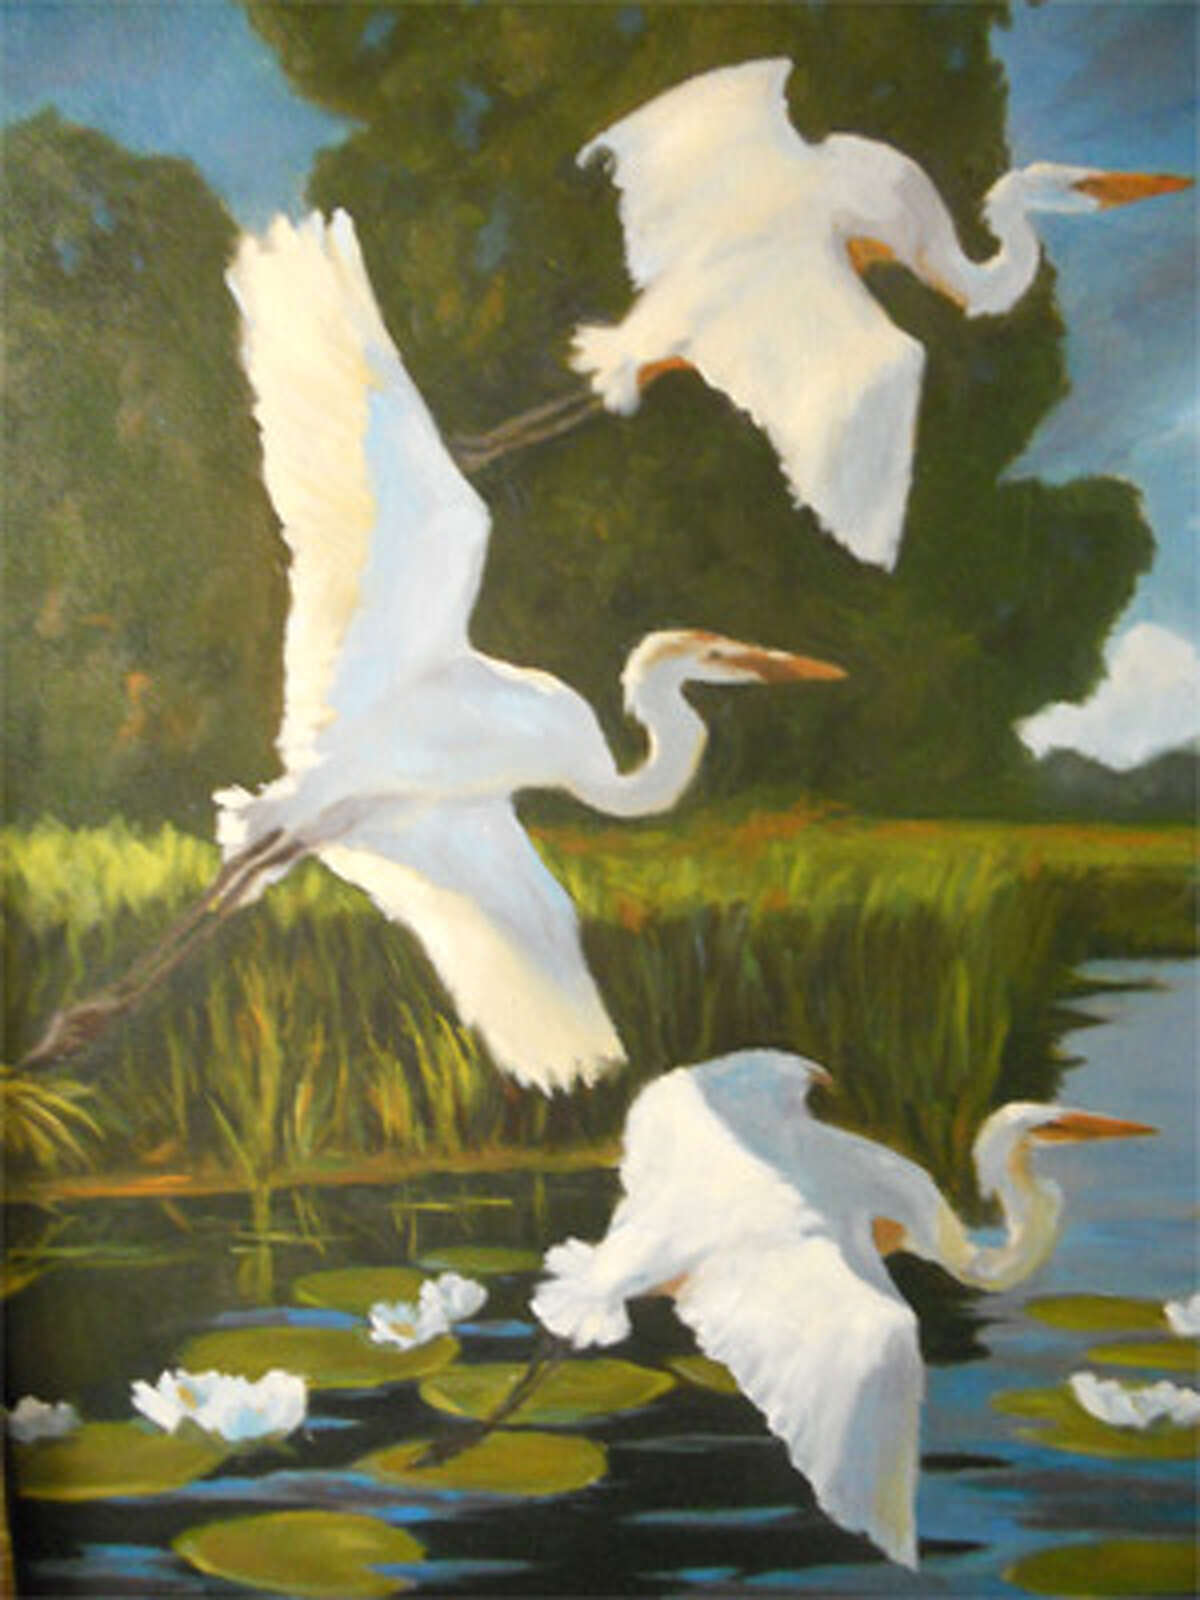 This painting by Shelton artist Diane Napolitano won Best in Show in the 2011 Bridgeport Art League juried show.